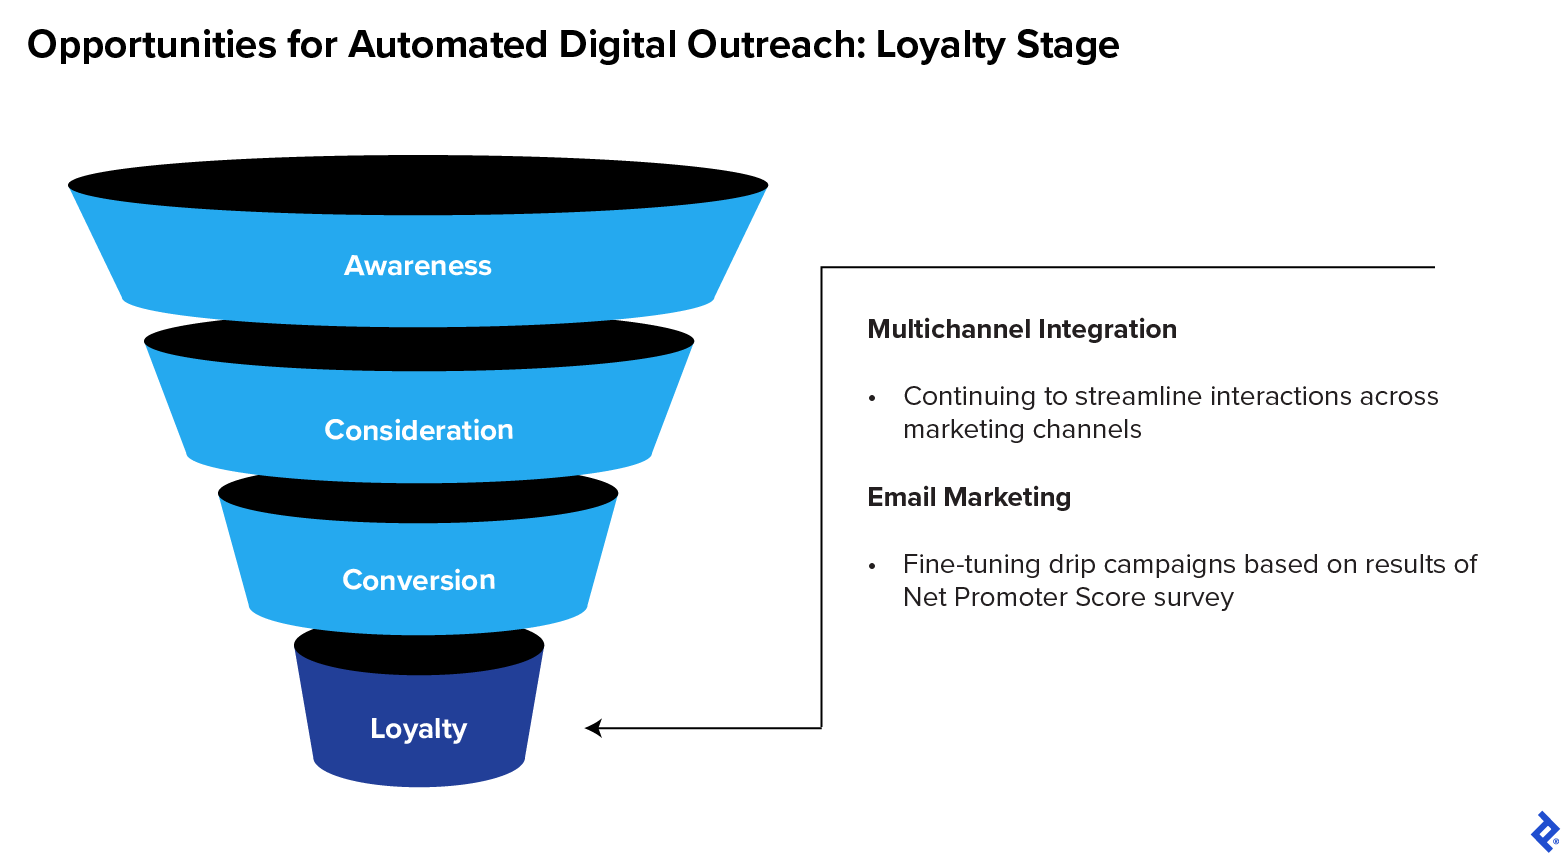 Loyalty-stage outreach automation ideas: segmentation based on multichannel integration for follow-up sequences and Net Promoter Score.